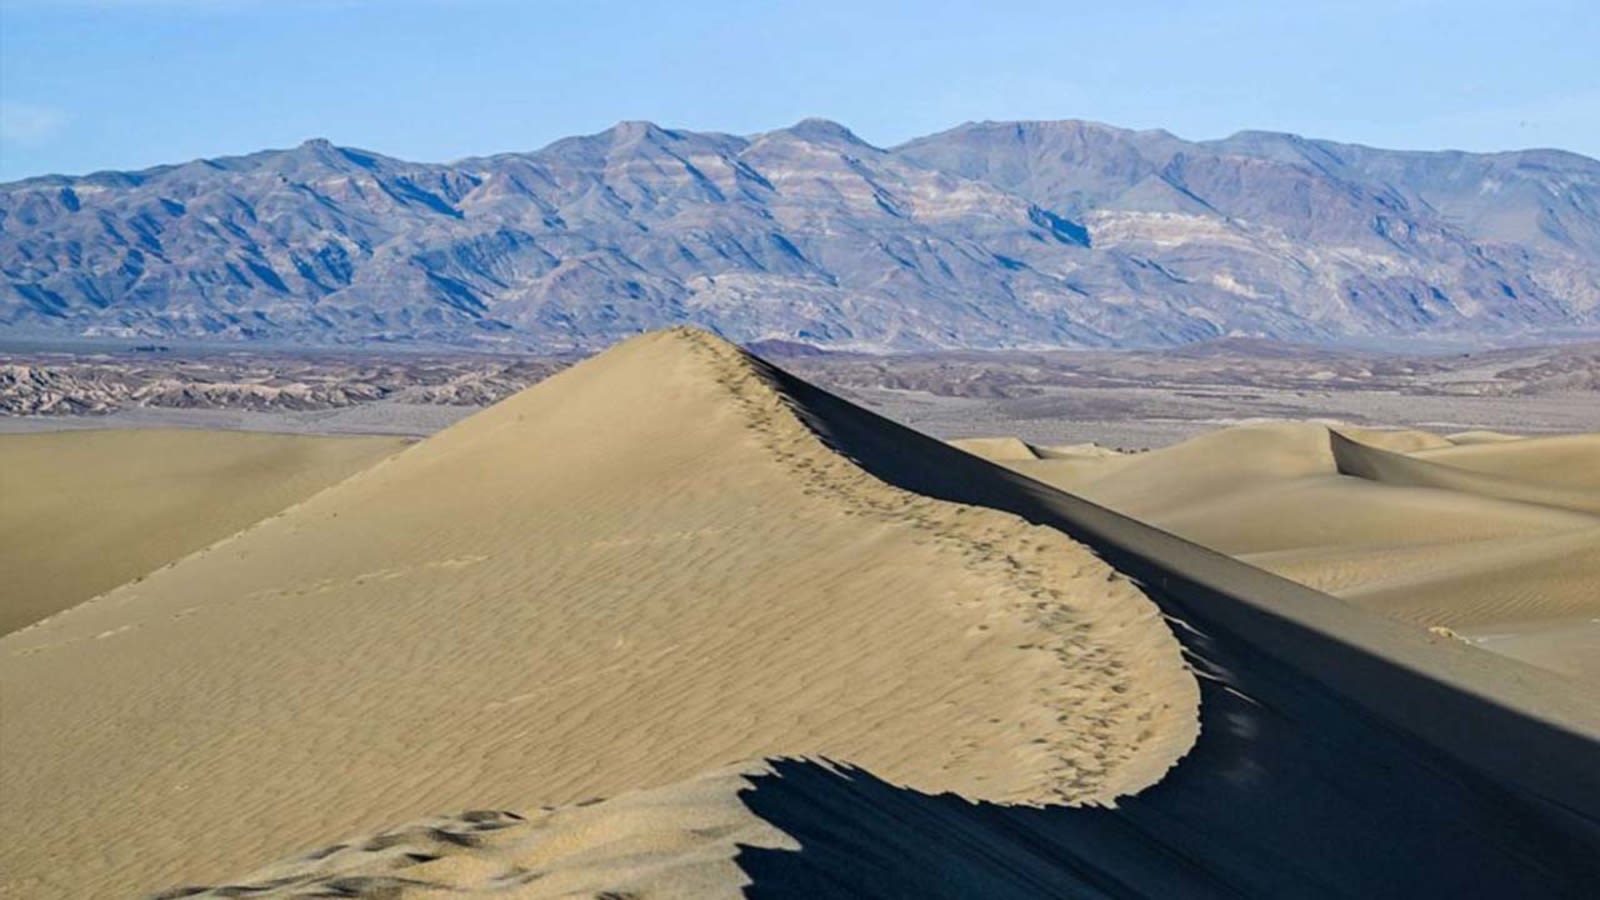 127 degrees: Heat record shattered in Death Valley, with high temperature of 130 in forecast